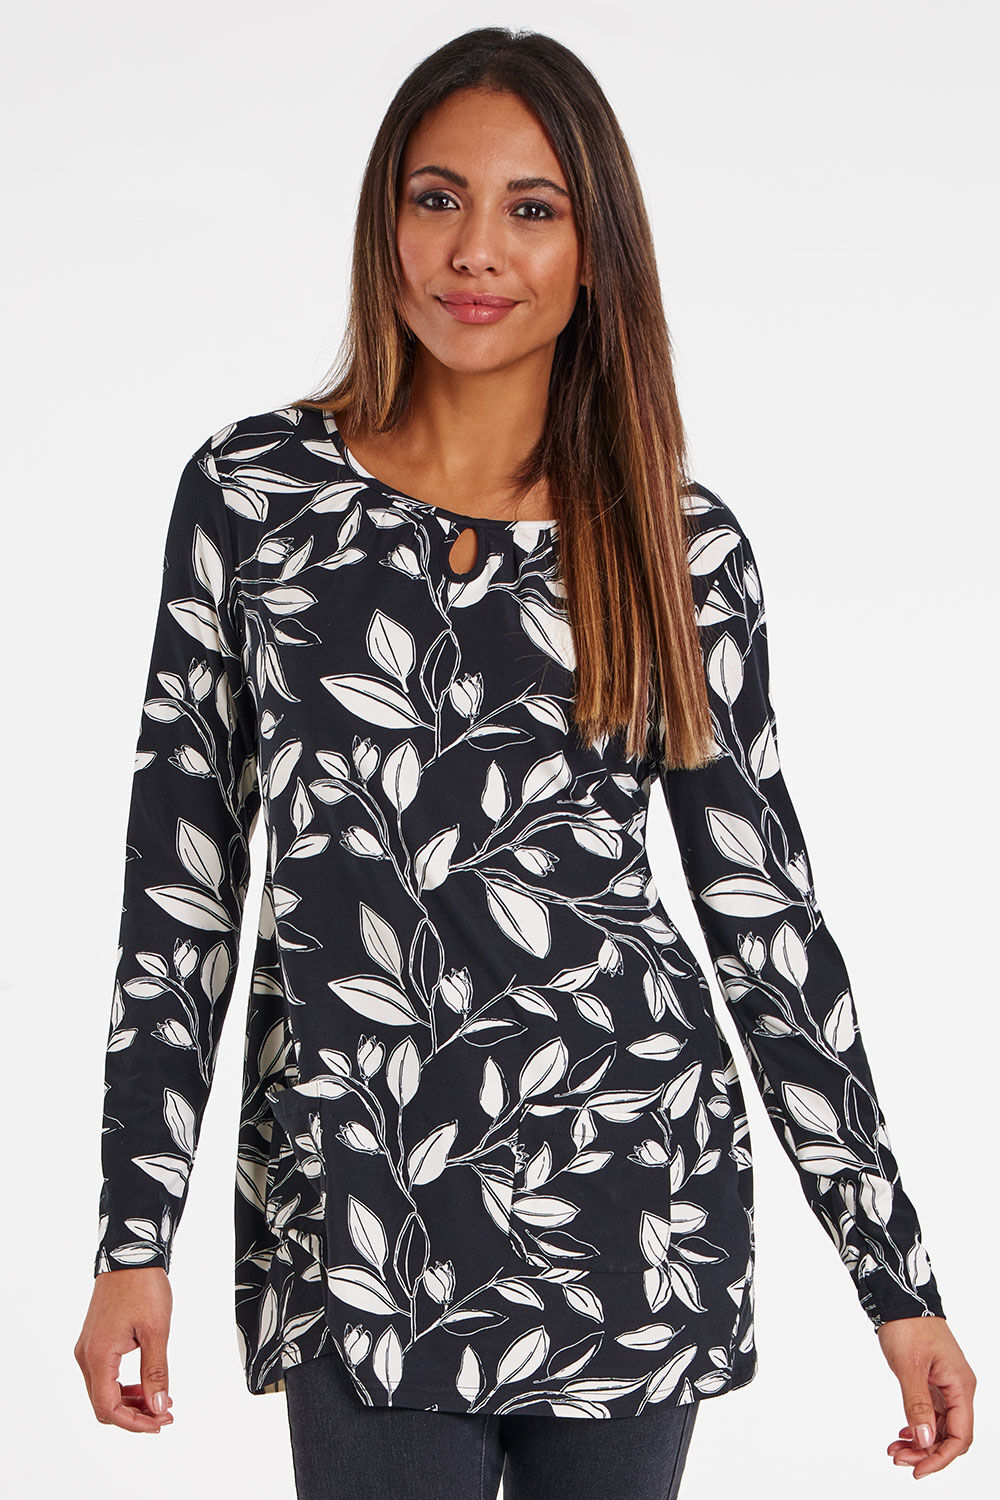 Bonmarche Black Long Sleeve Leaf Print Tunic With Pockets, Size: 12